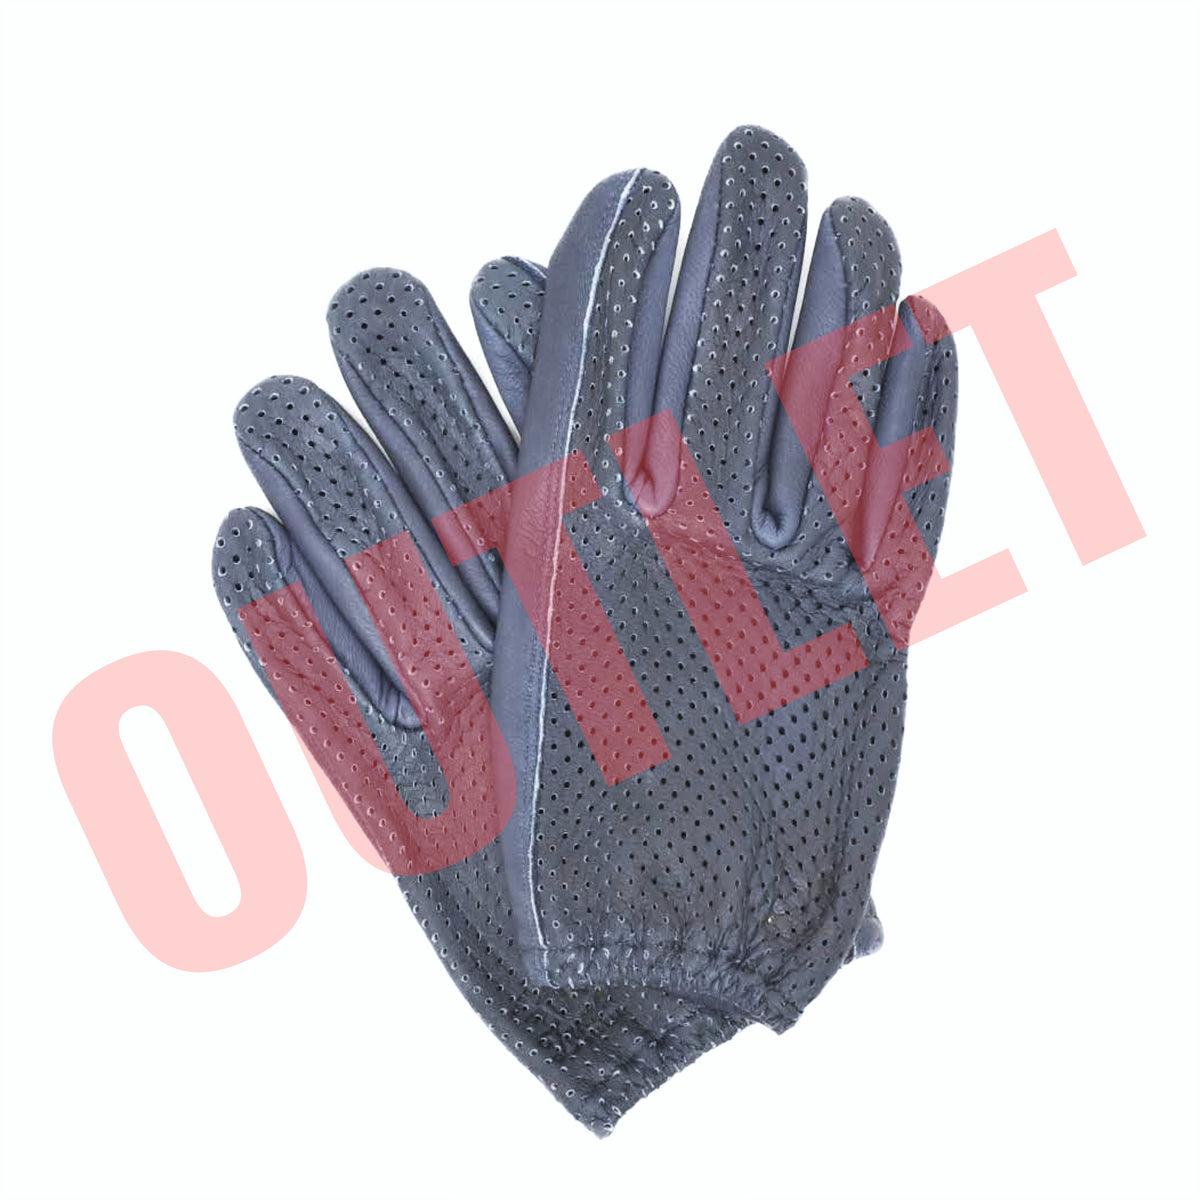 【OUTLET】Lamp gloves -Punching glove- Navy